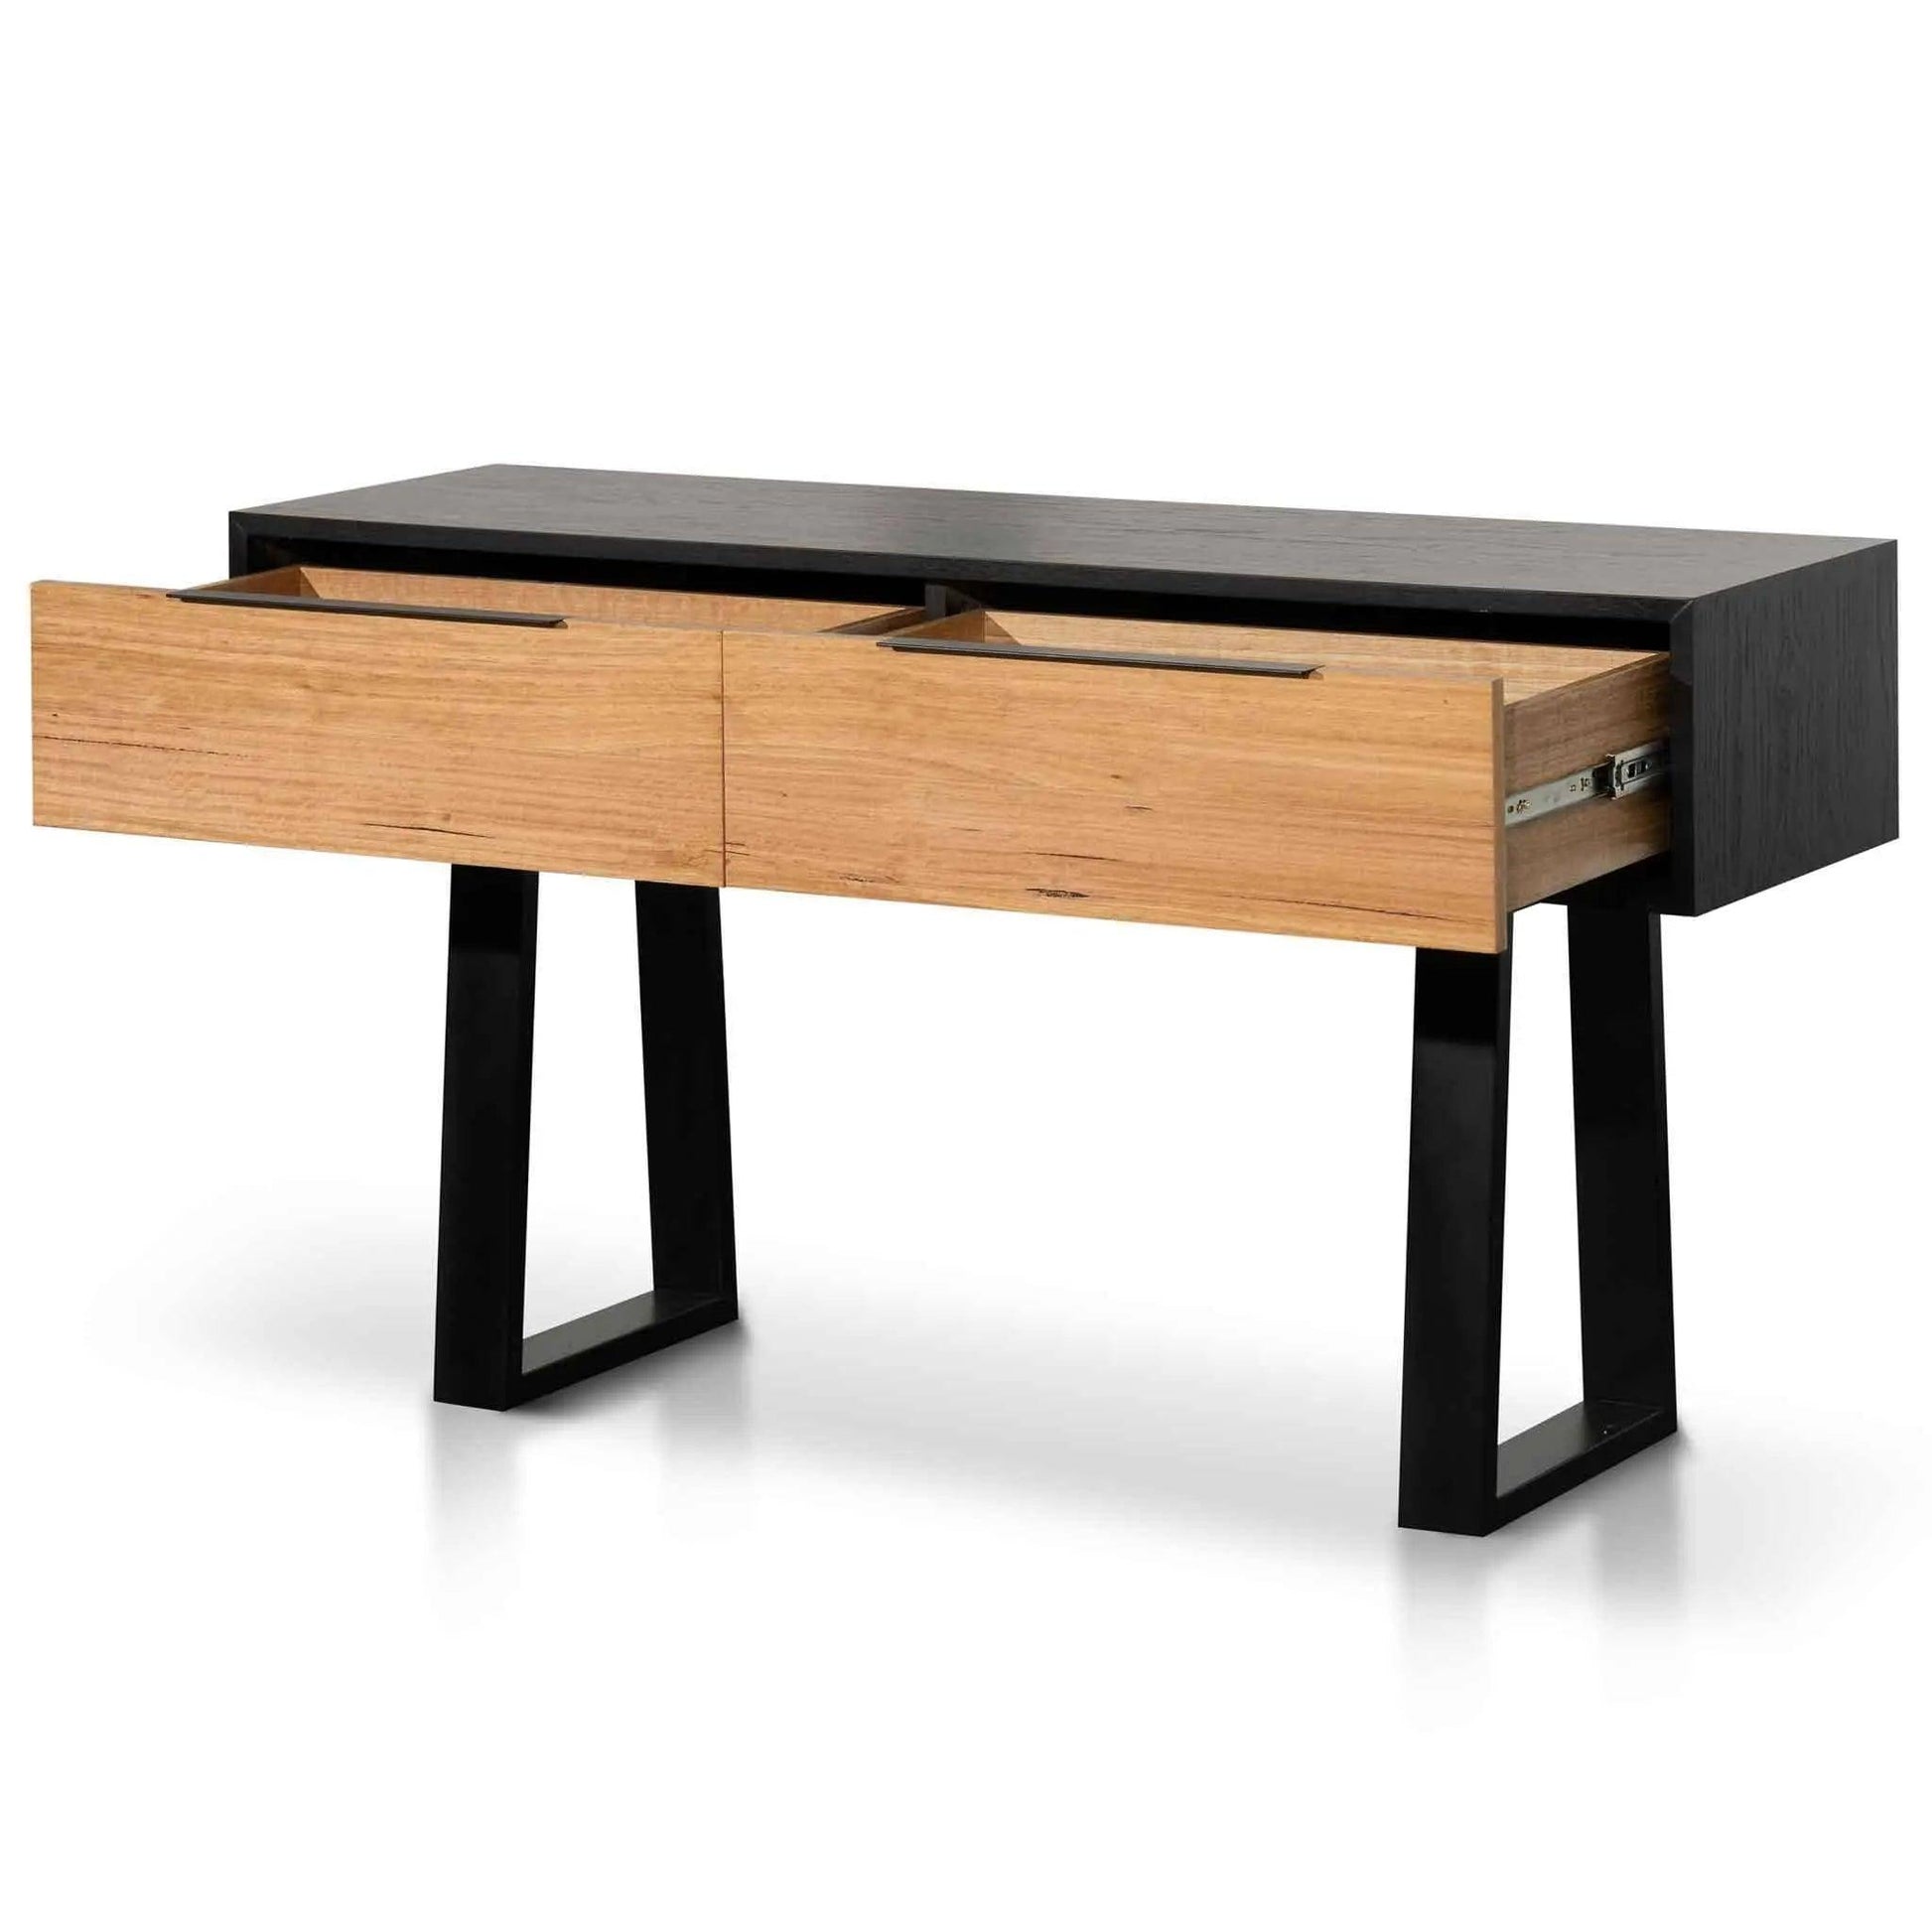 Calibre 1.3m Console Table - Messmate - Console TablesDT6334-AW 3